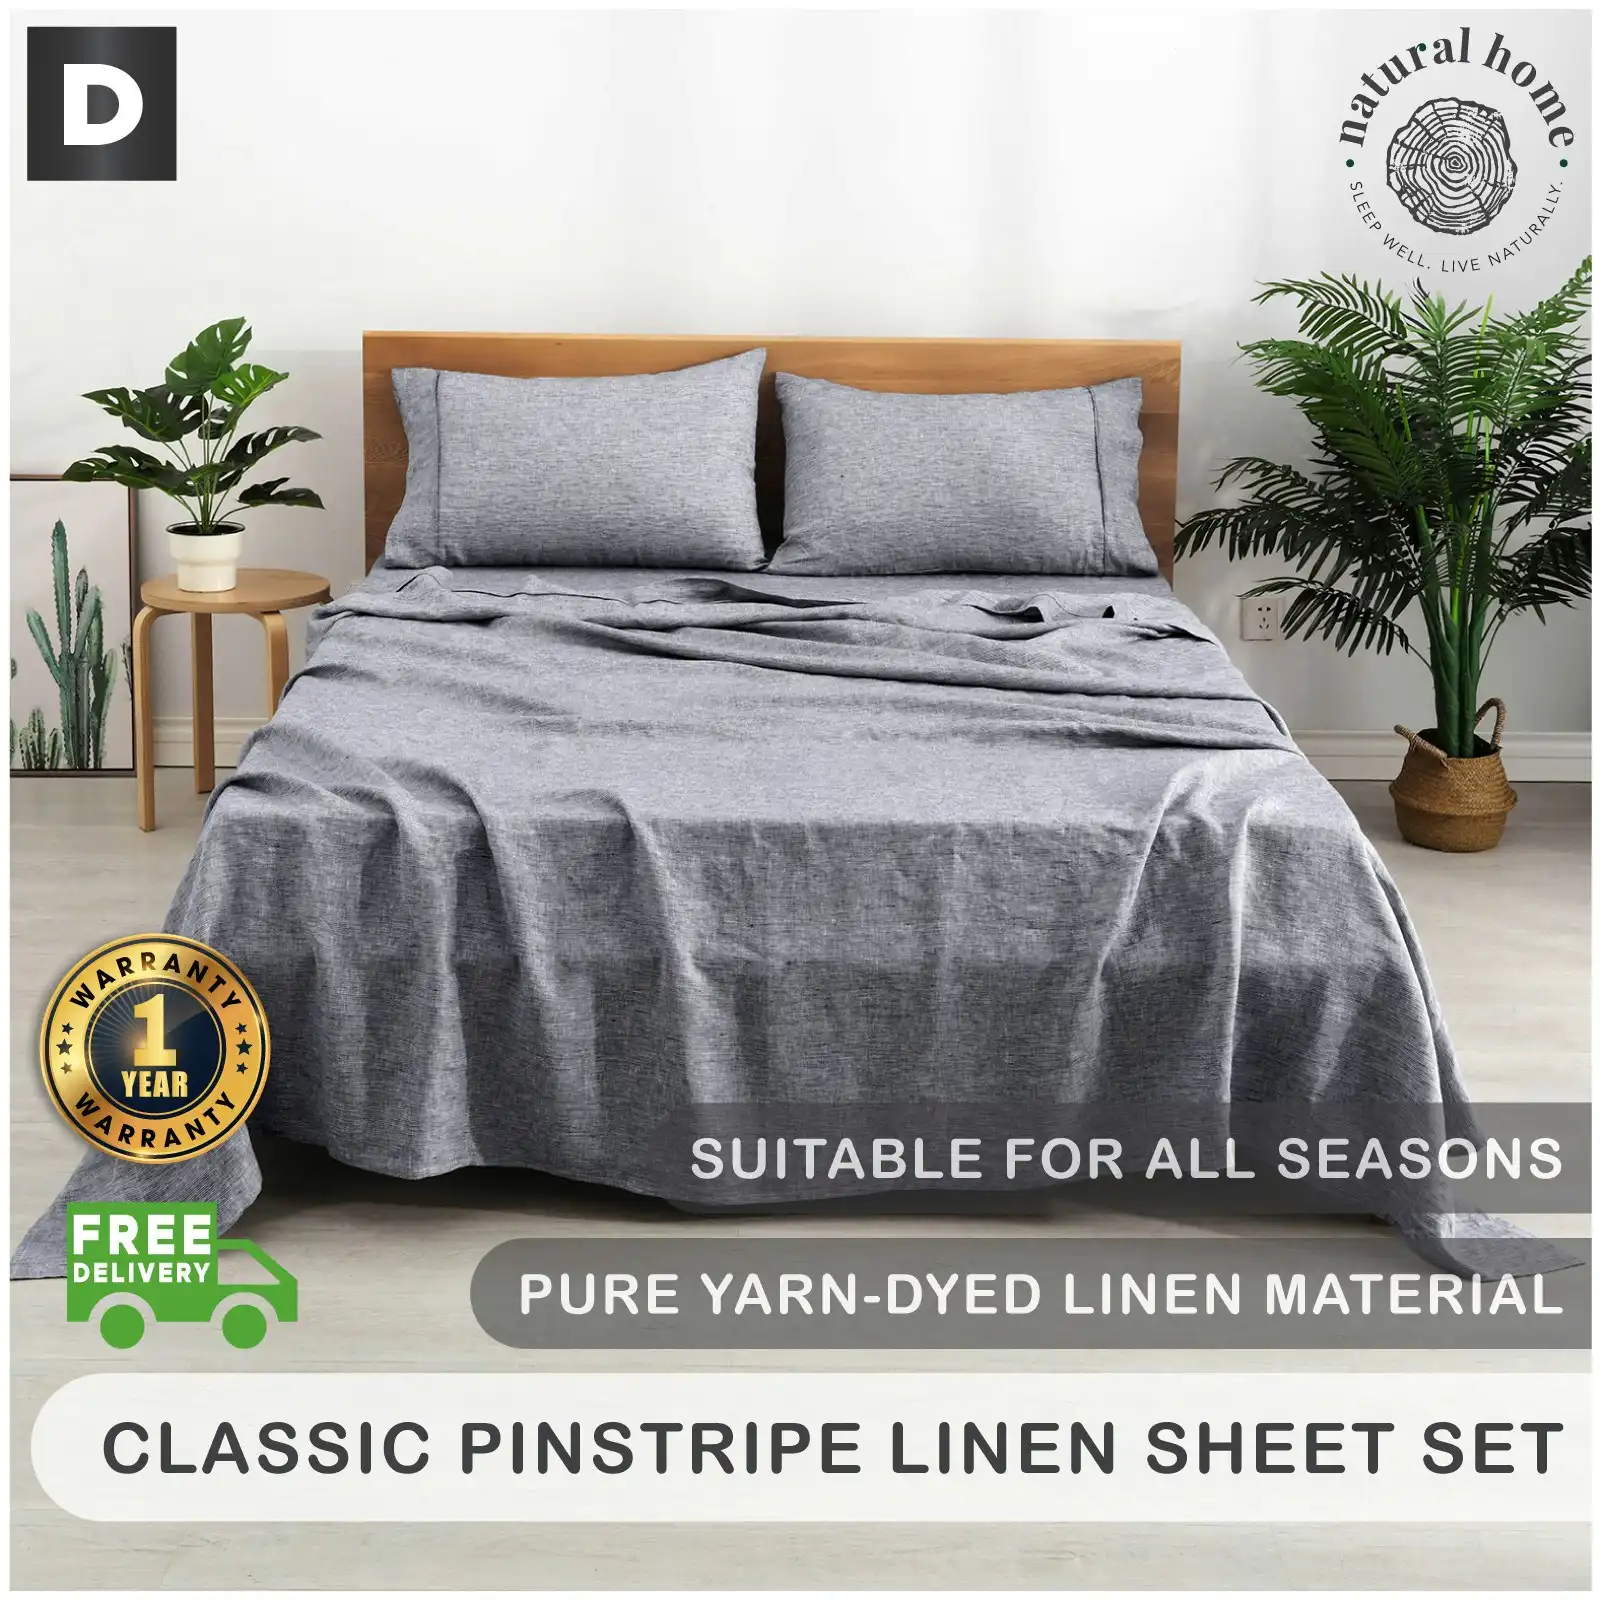 Natural Home Classic Pinstripe Linen Sheet Set Dark with White Pinstripe Double Bed